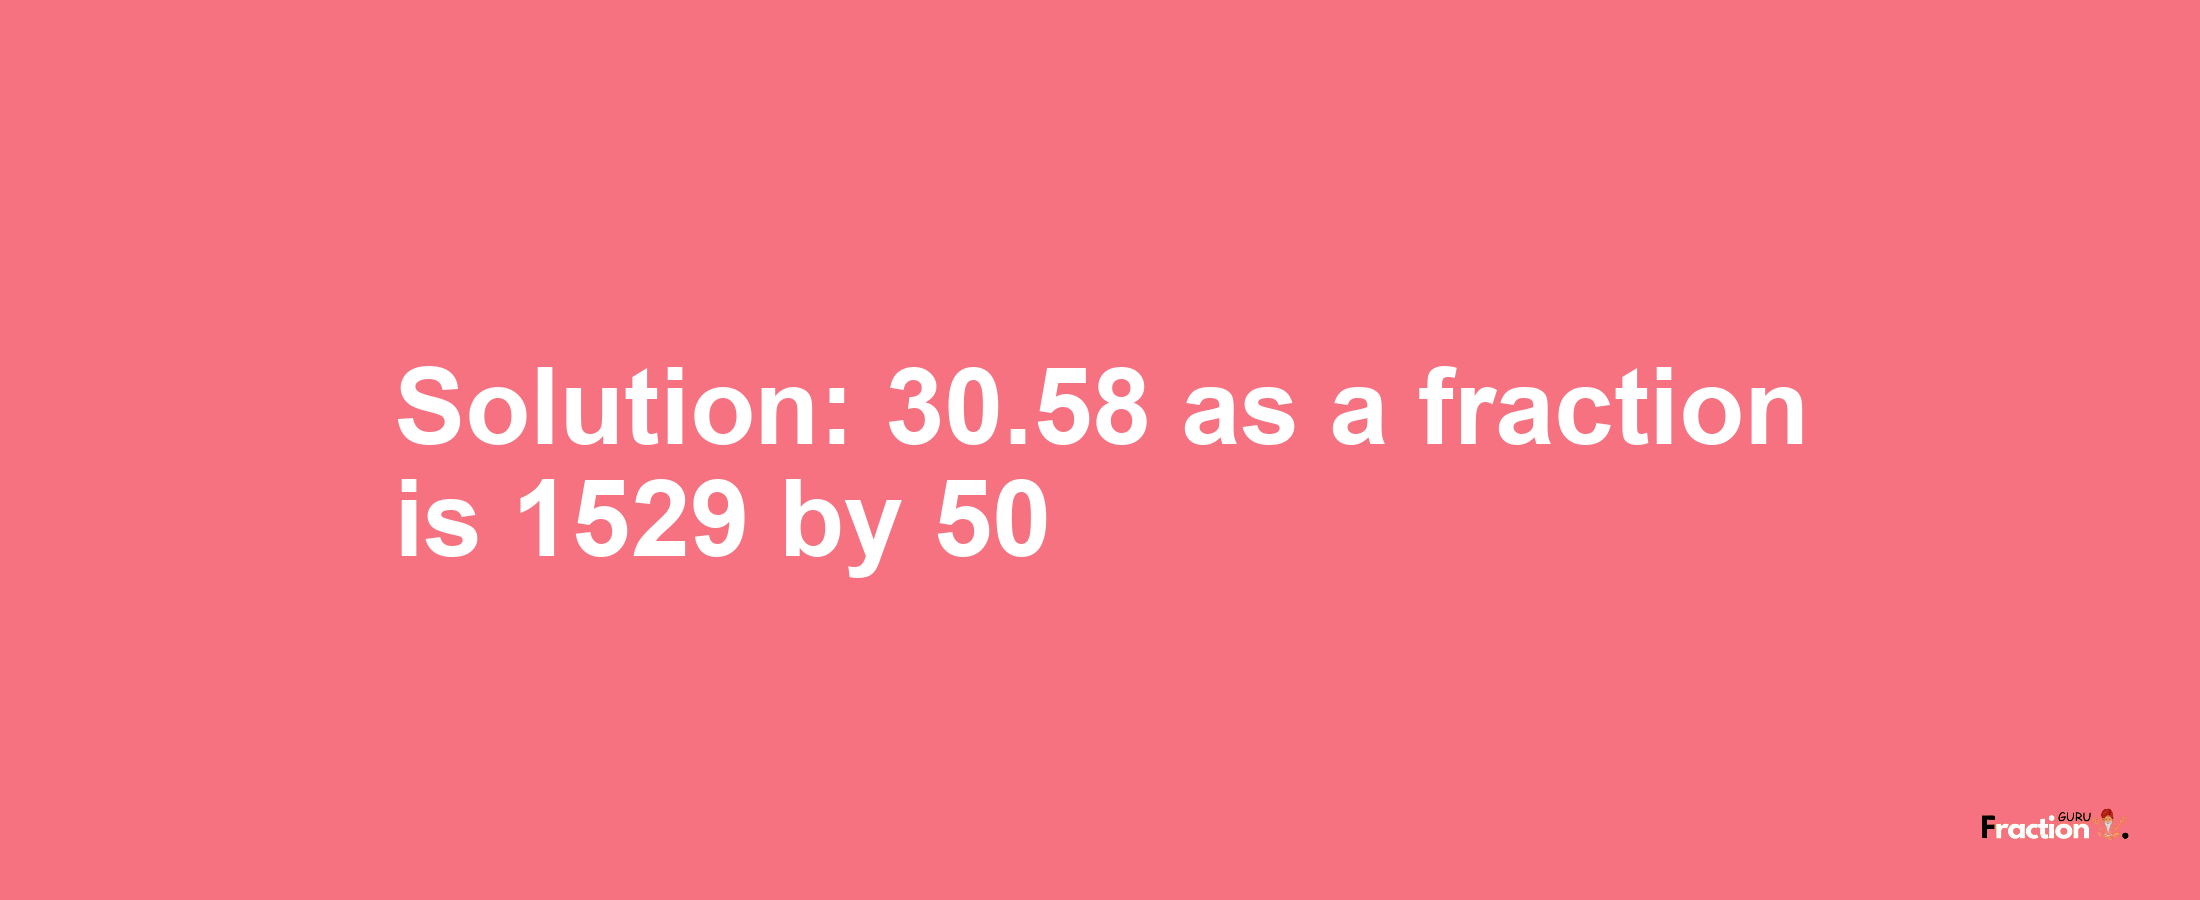 Solution:30.58 as a fraction is 1529/50